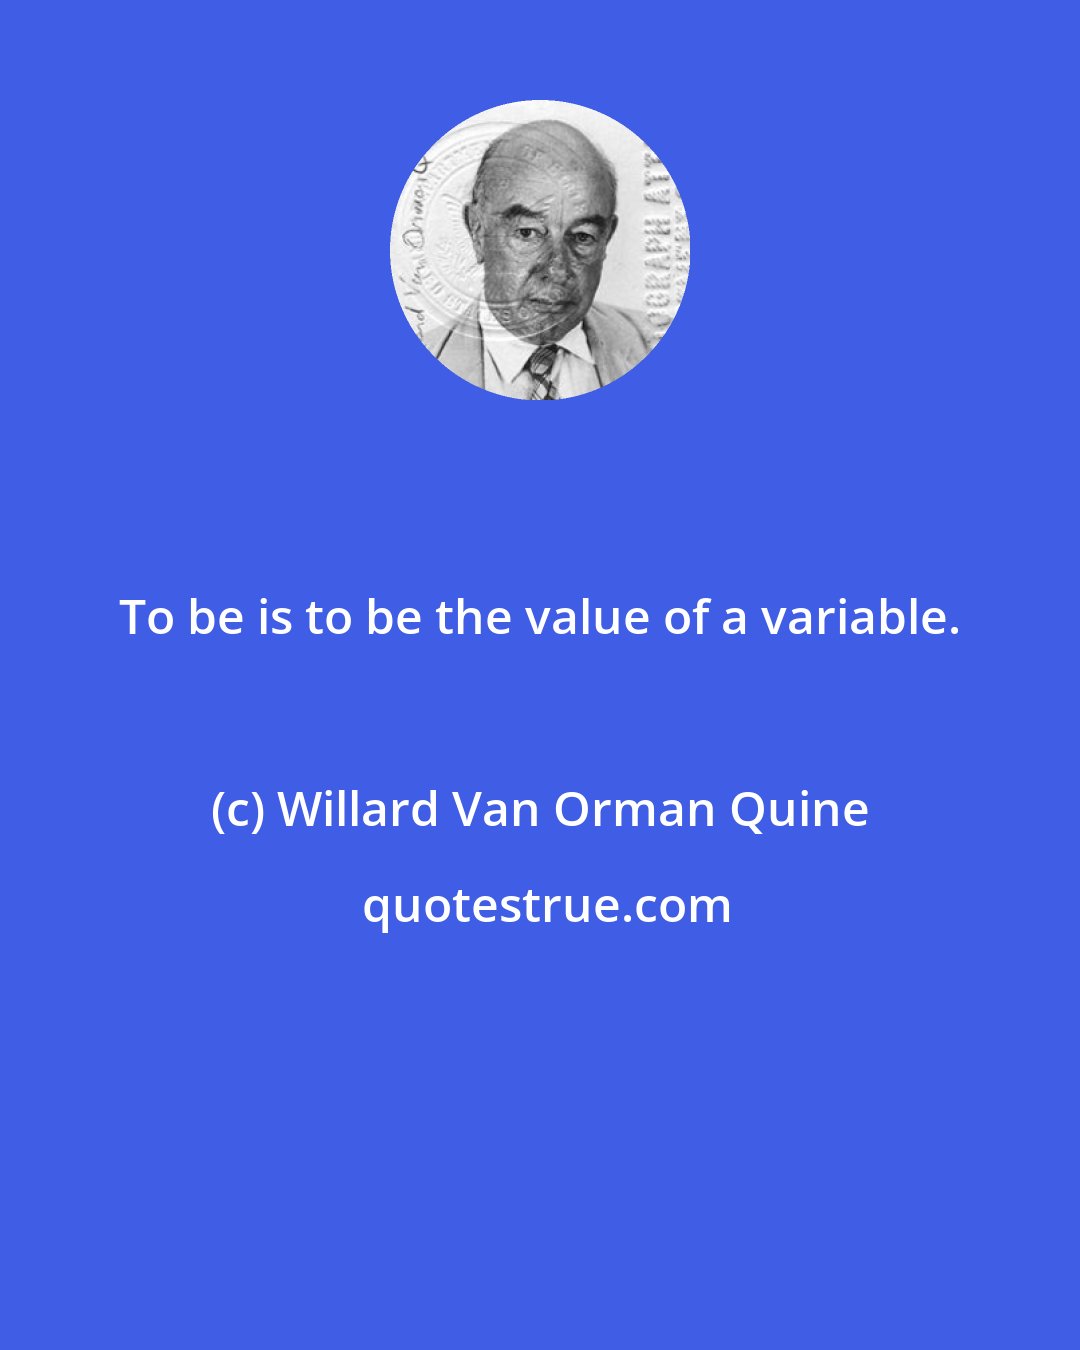 Willard Van Orman Quine: To be is to be the value of a variable.